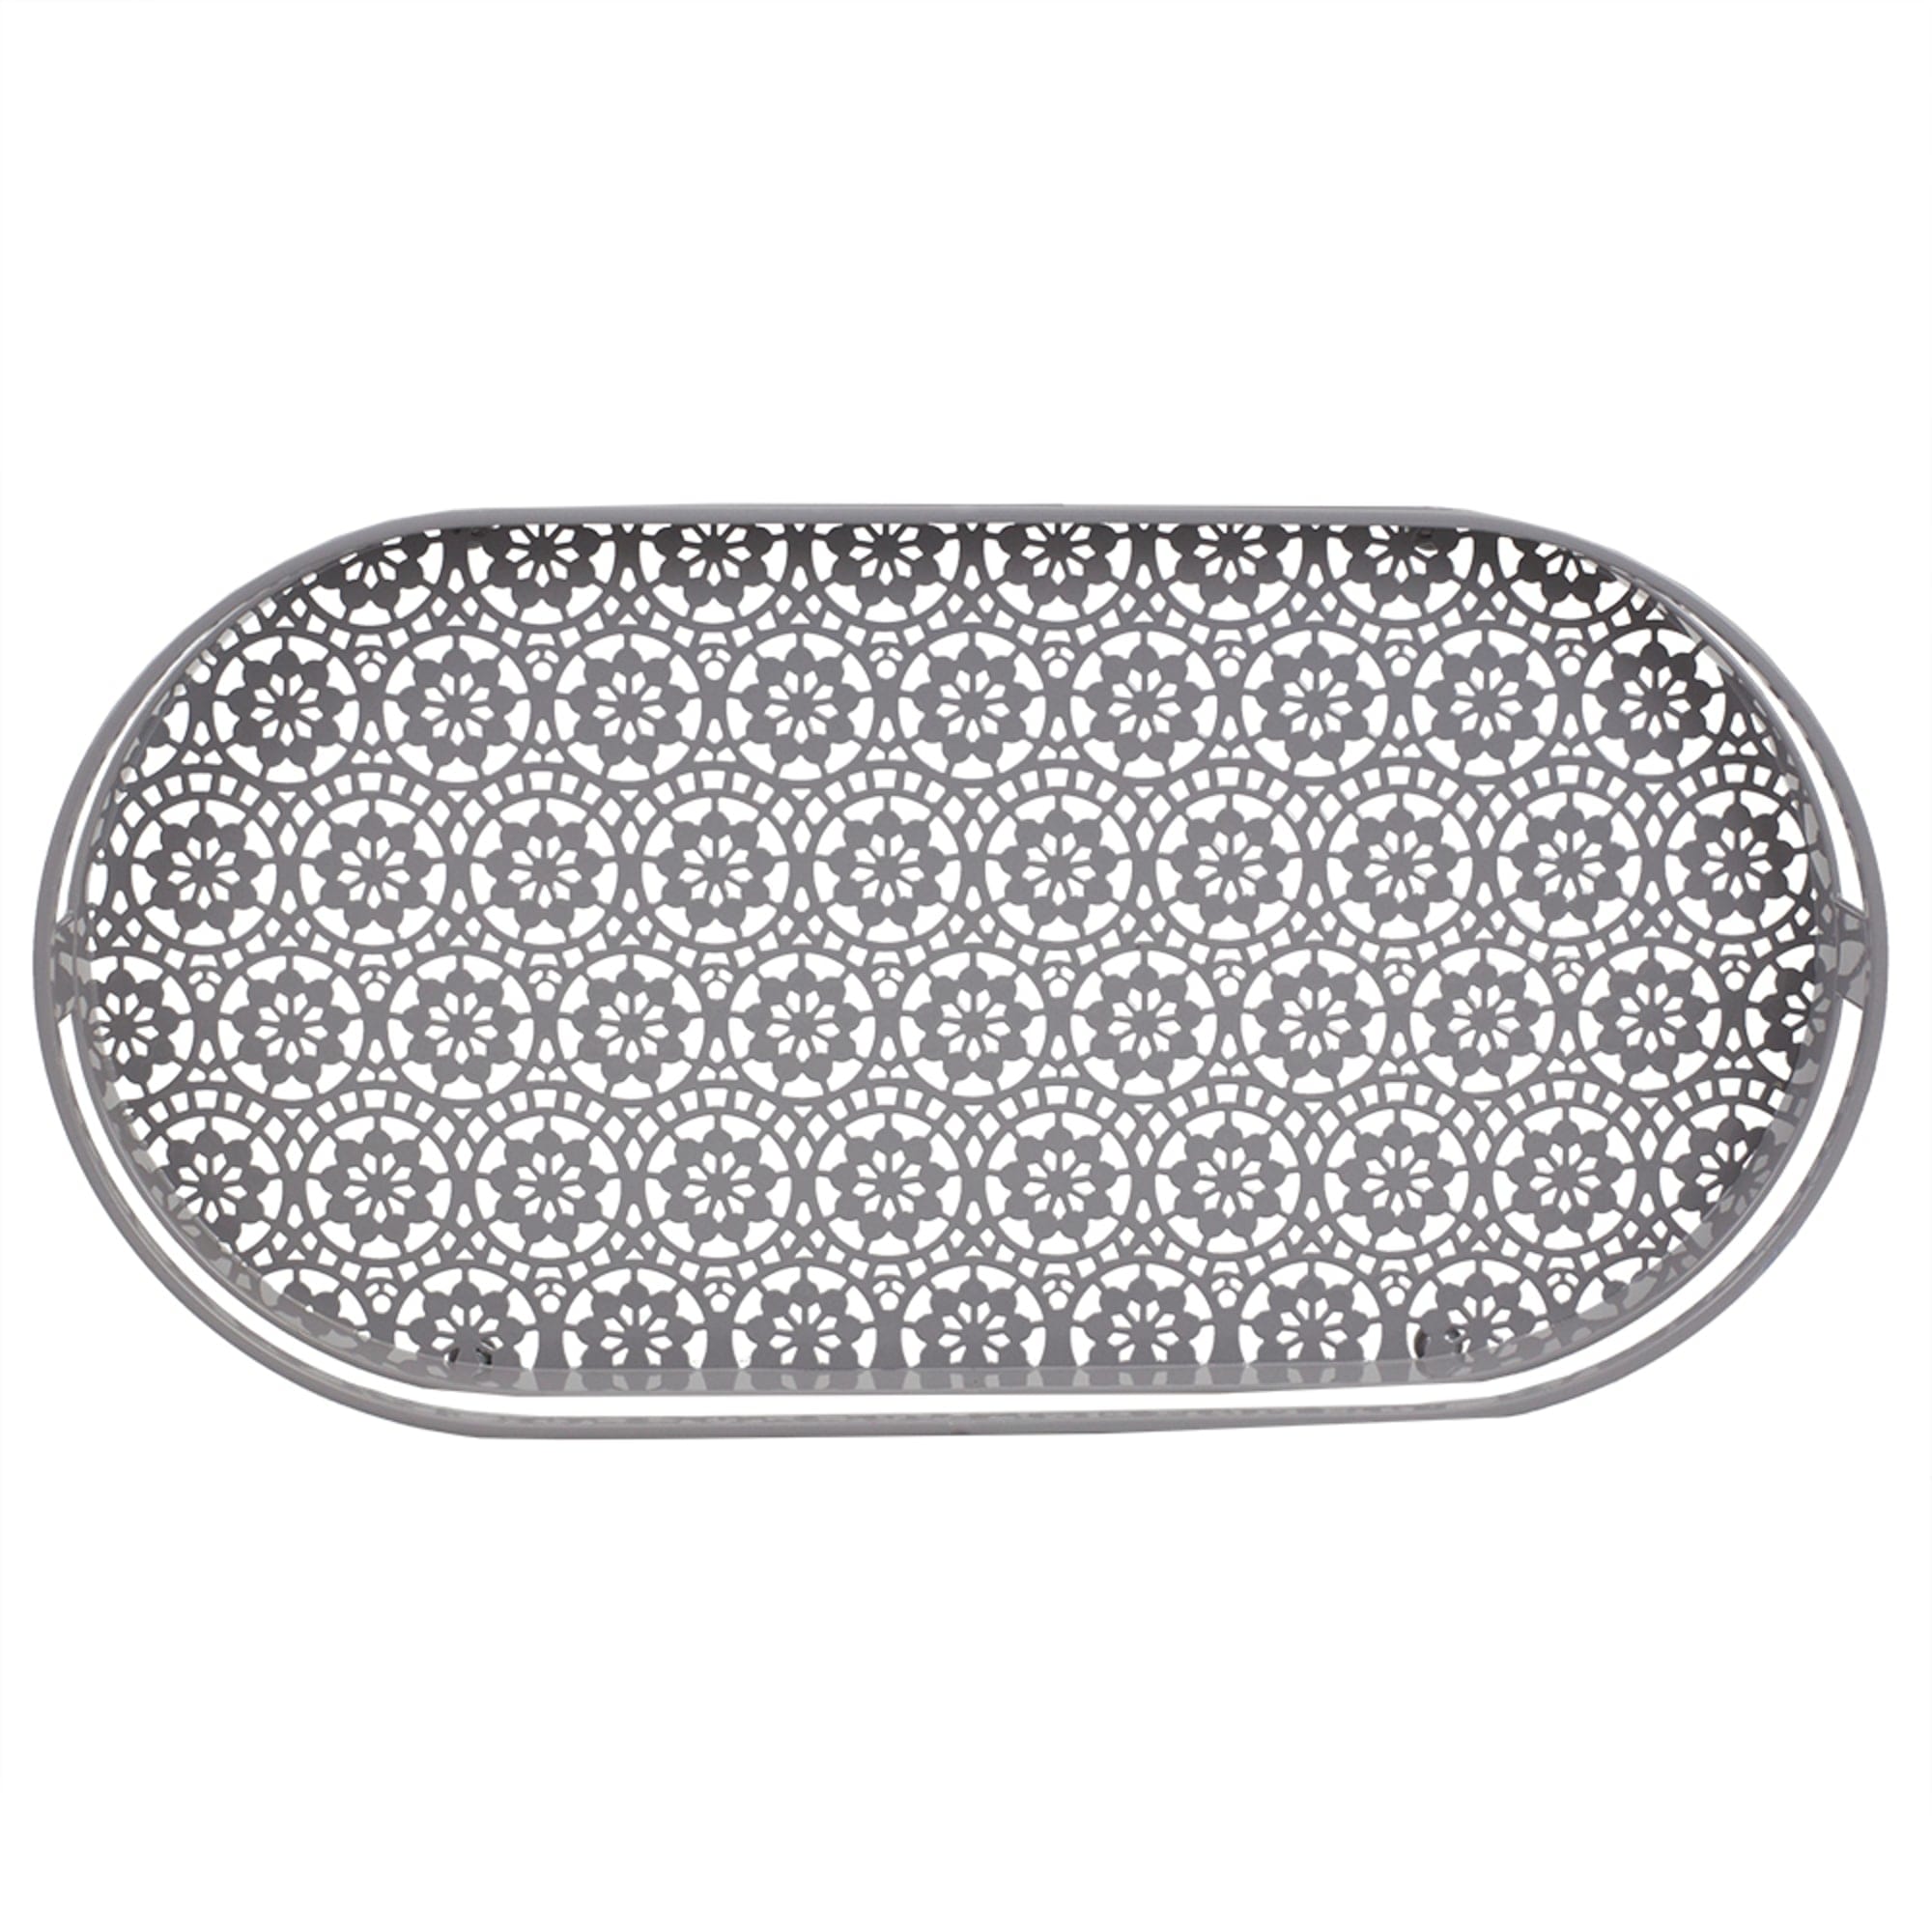 Home Basics Oval Lace Decorative Plastic  Vanity Tray with Rounded Feet, Grey $10.00 EACH, CASE PACK OF 12